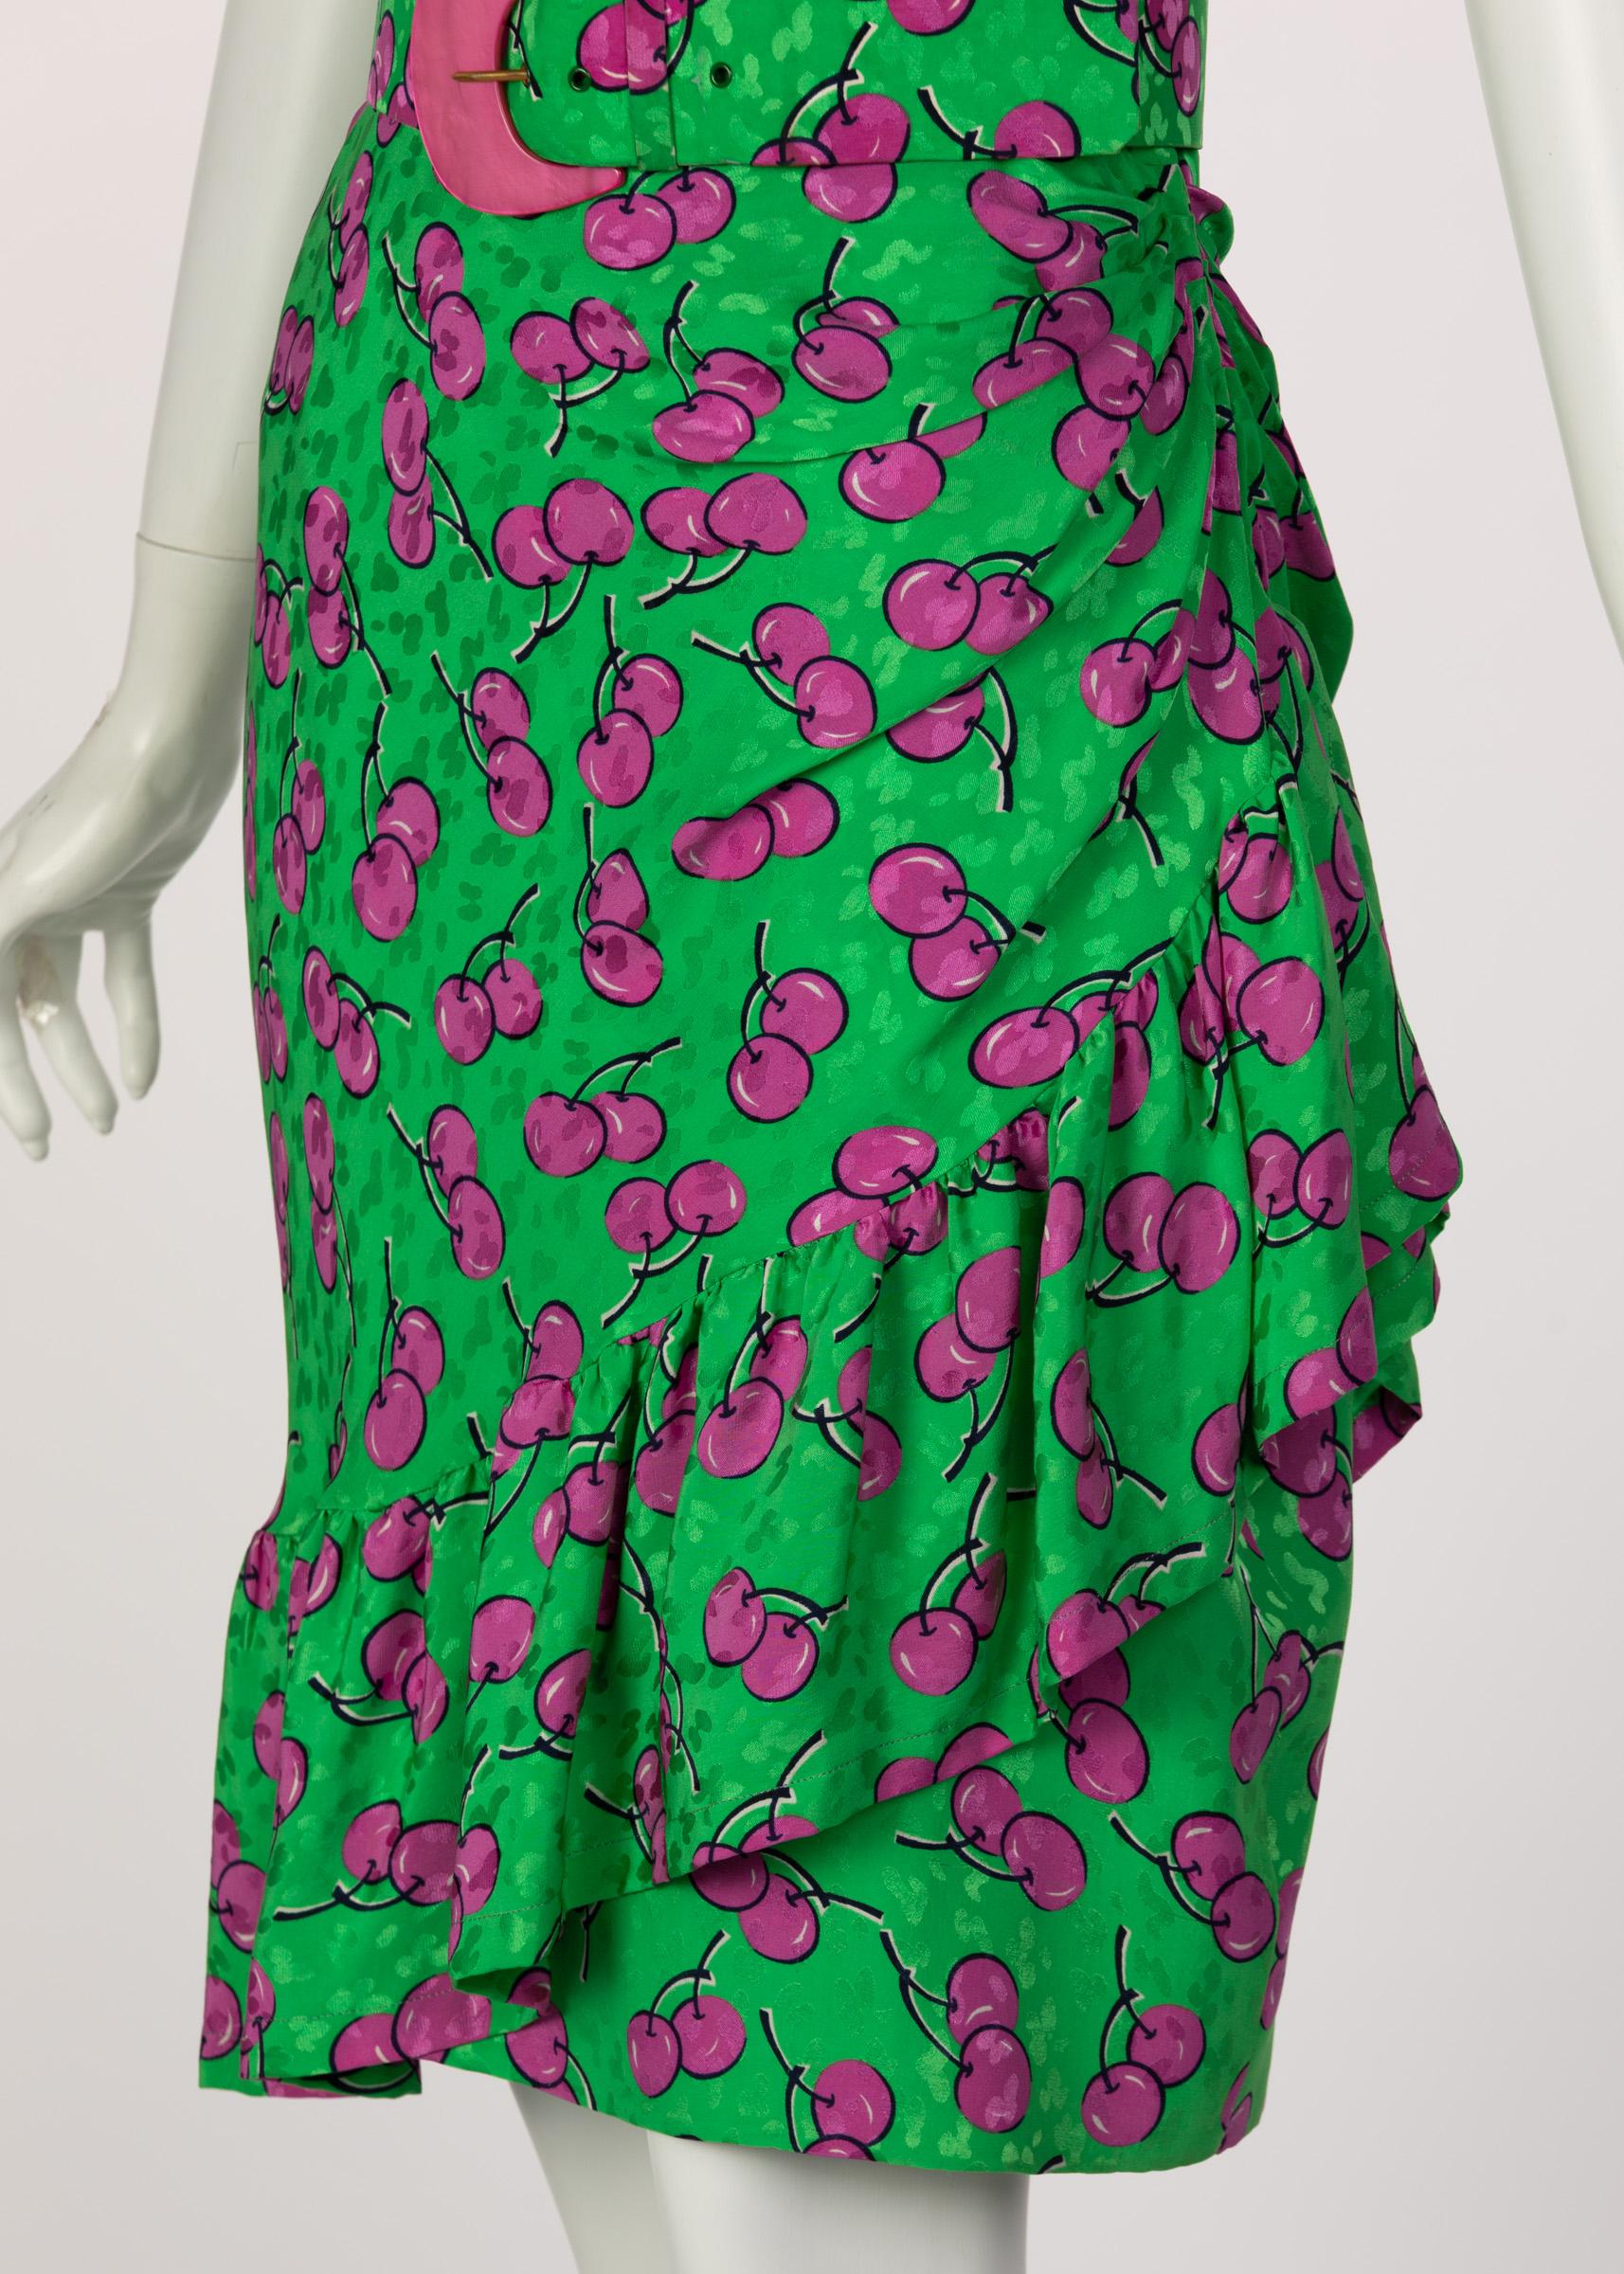 Givenchy Silk Green Cherry Print Cocktail Dress, 1980s For Sale 4